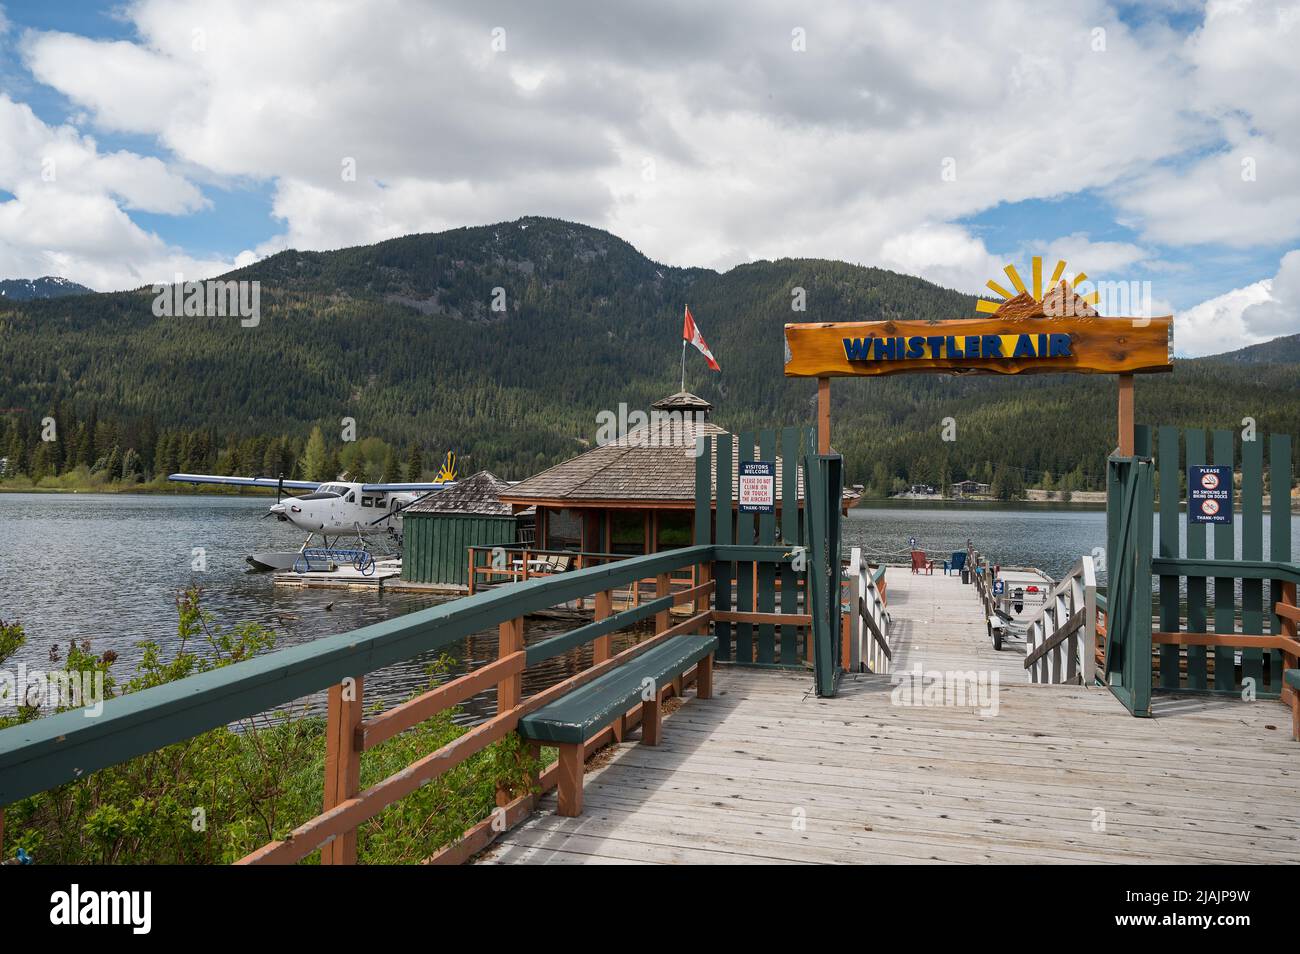 The Whistler Air and Harbour Air float plane base at Green Lake in Whistler BC, Canada. Stock Photo